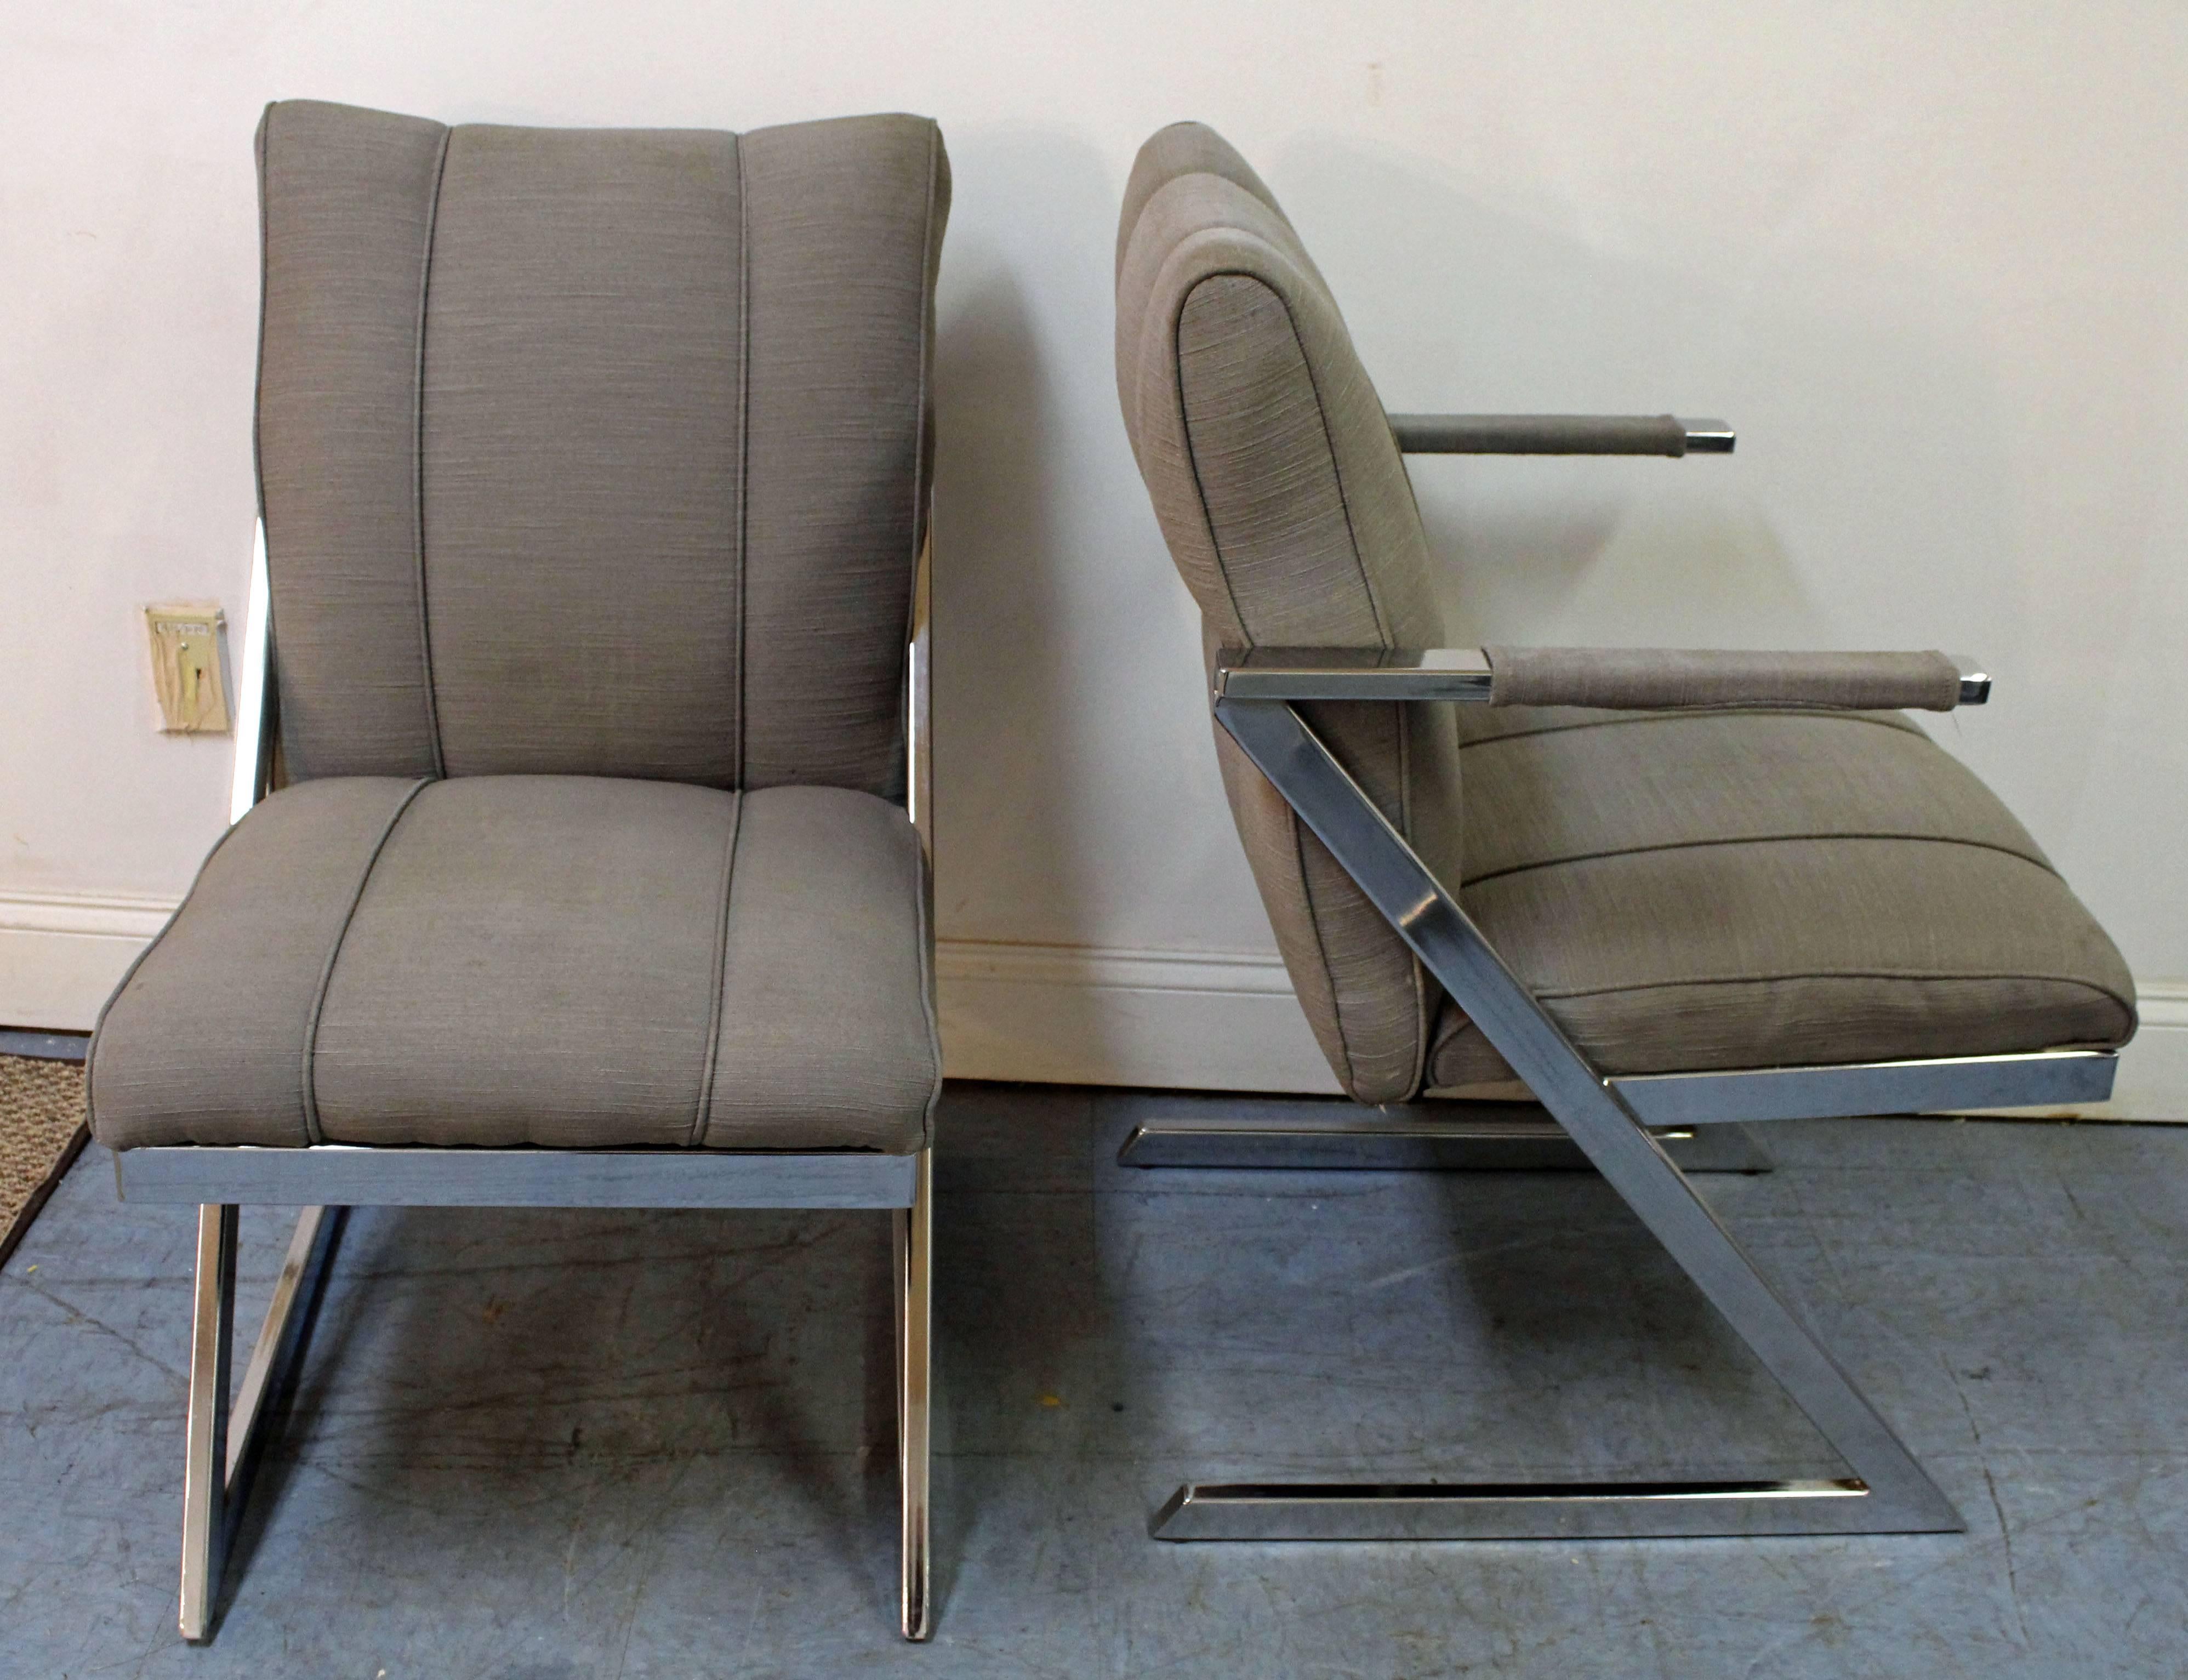 Offered is a set of six chrome dining chairs, by Design Institute of America (DIA). The chairs have a z-bar cantilevered base and are made of chrome. They are in great condition for their age, but show some age wear and can stand to be